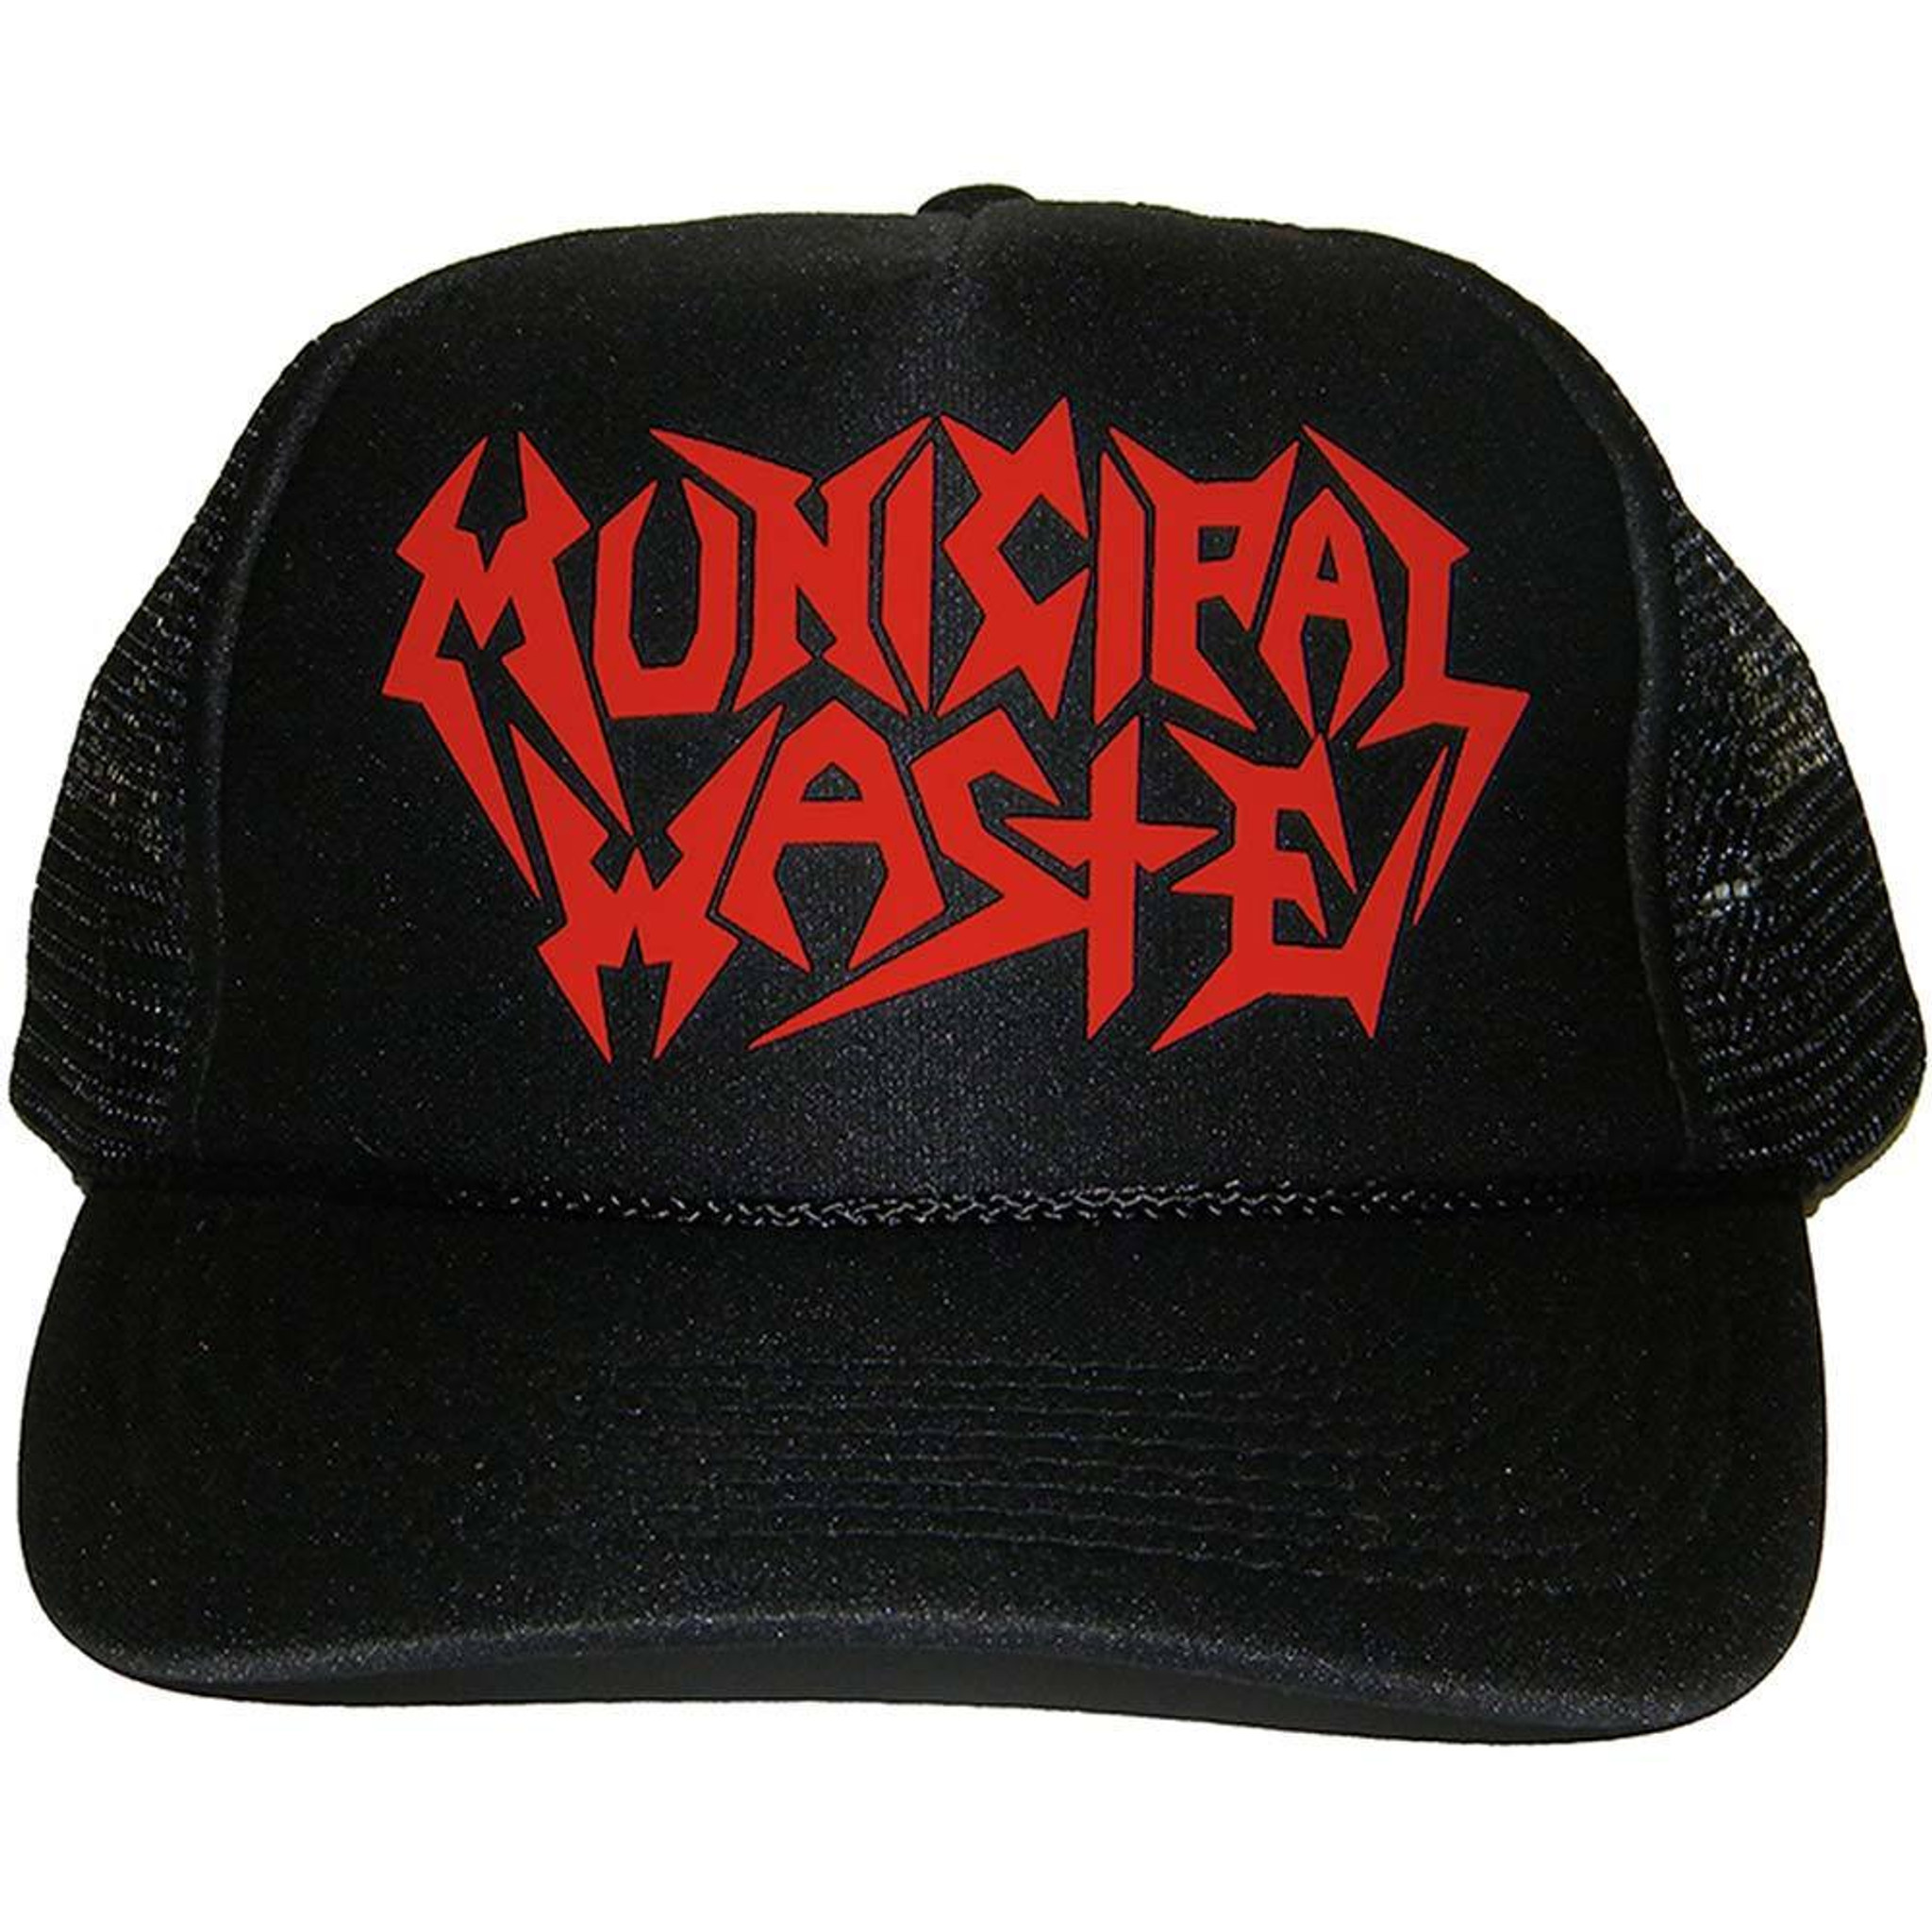 Waste Classic Hat Municipal Wasted Trucker Cap